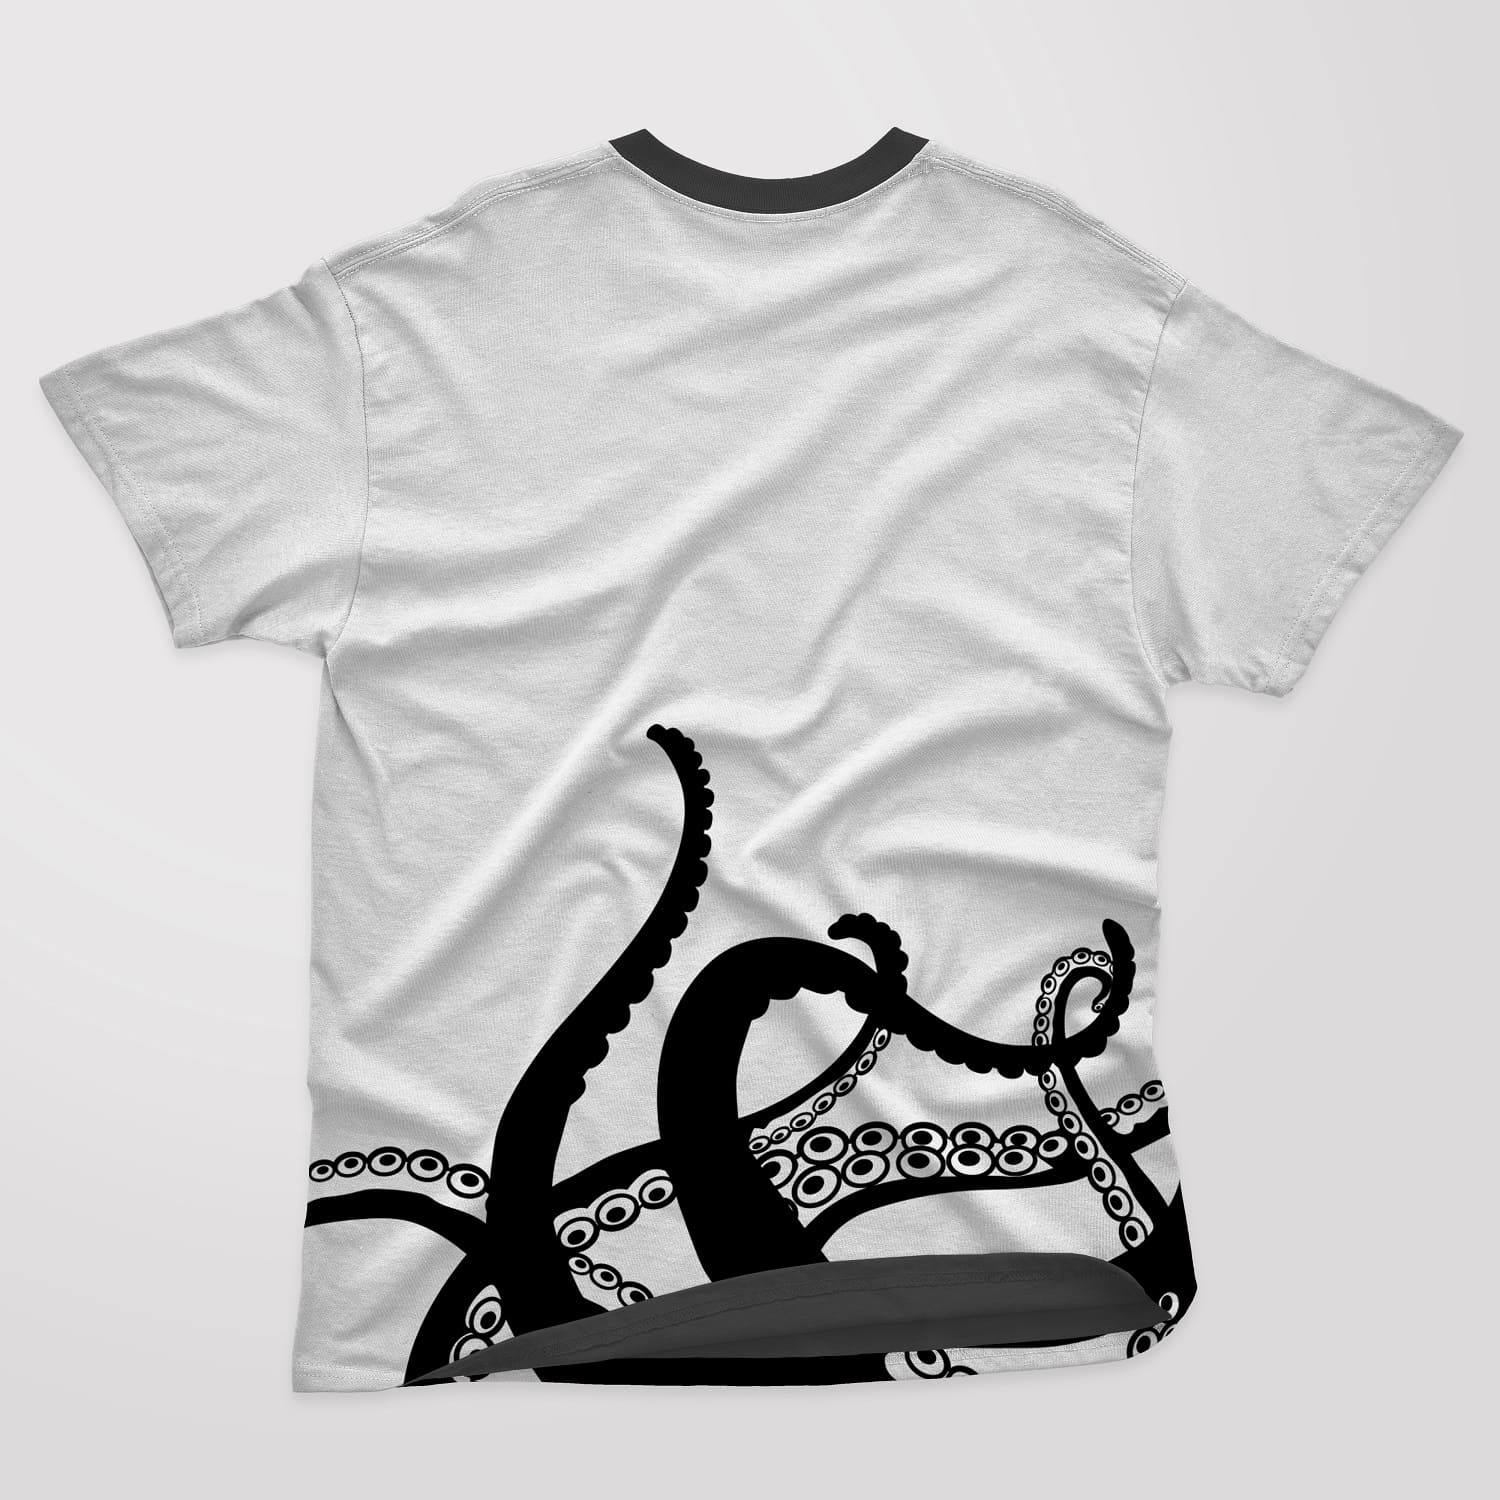 Black and white t-shirt with octopus tentacles on a white background.